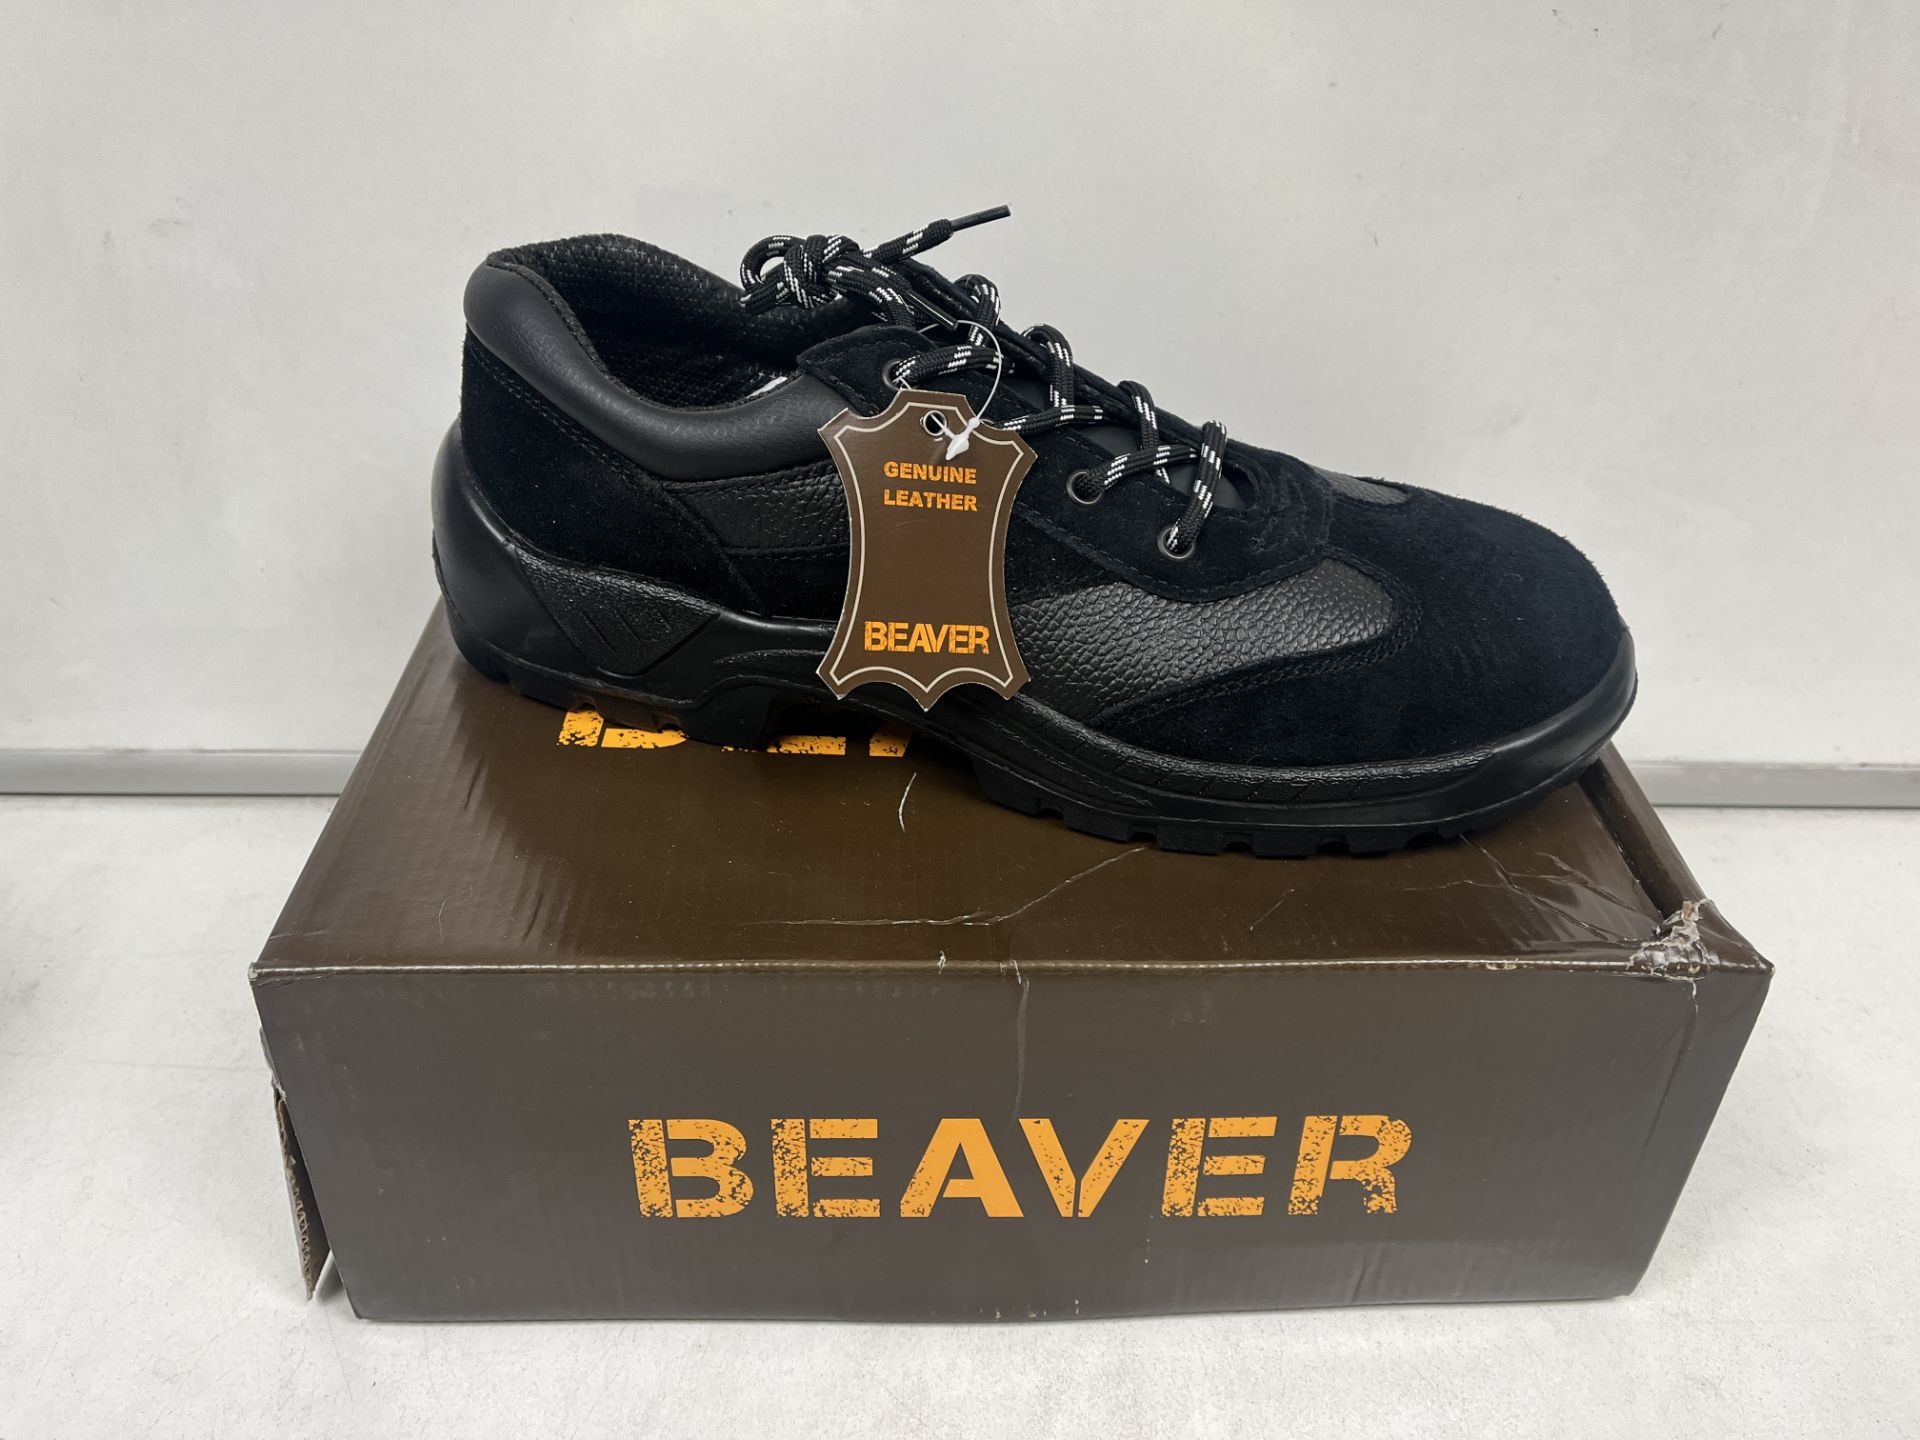 6 X BRAND NEW BEAVER PROFESSIONAL WORK BOOTS IN VARIOUS SIZES R17-1